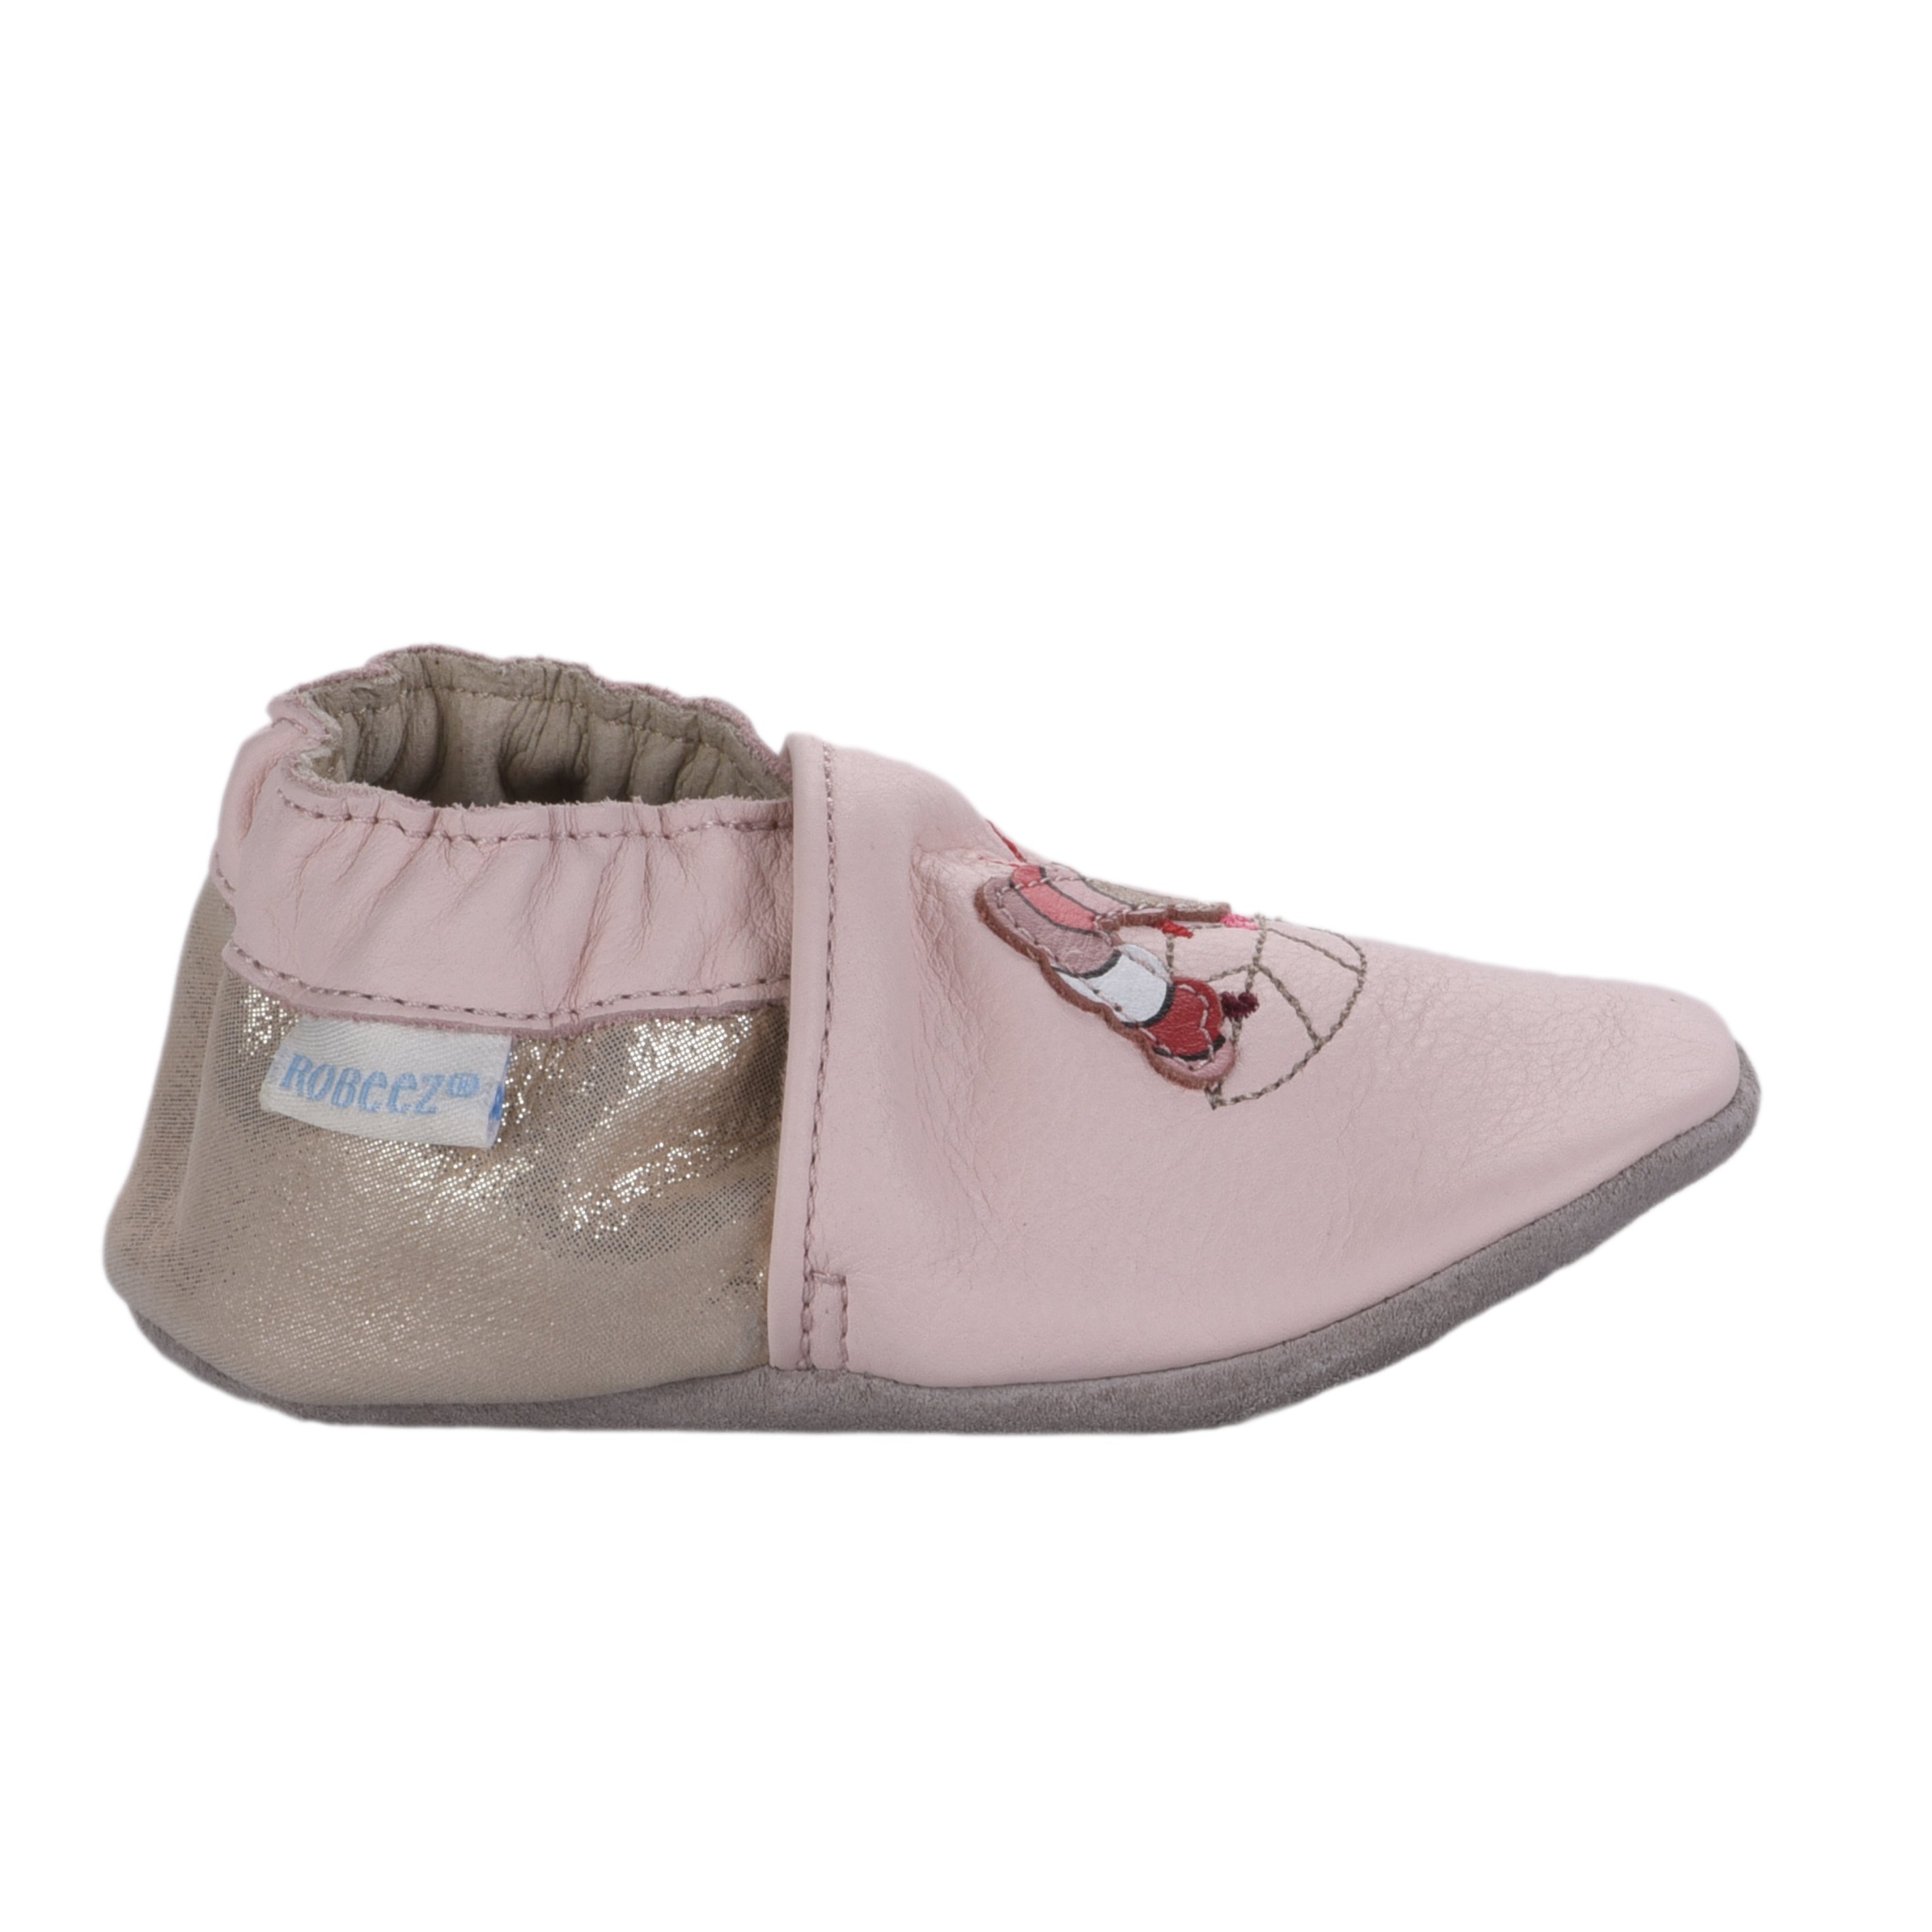 Robeez Wheasle Girl - Chaussons (Rose) - Chaussons chez Sarenza (668970)